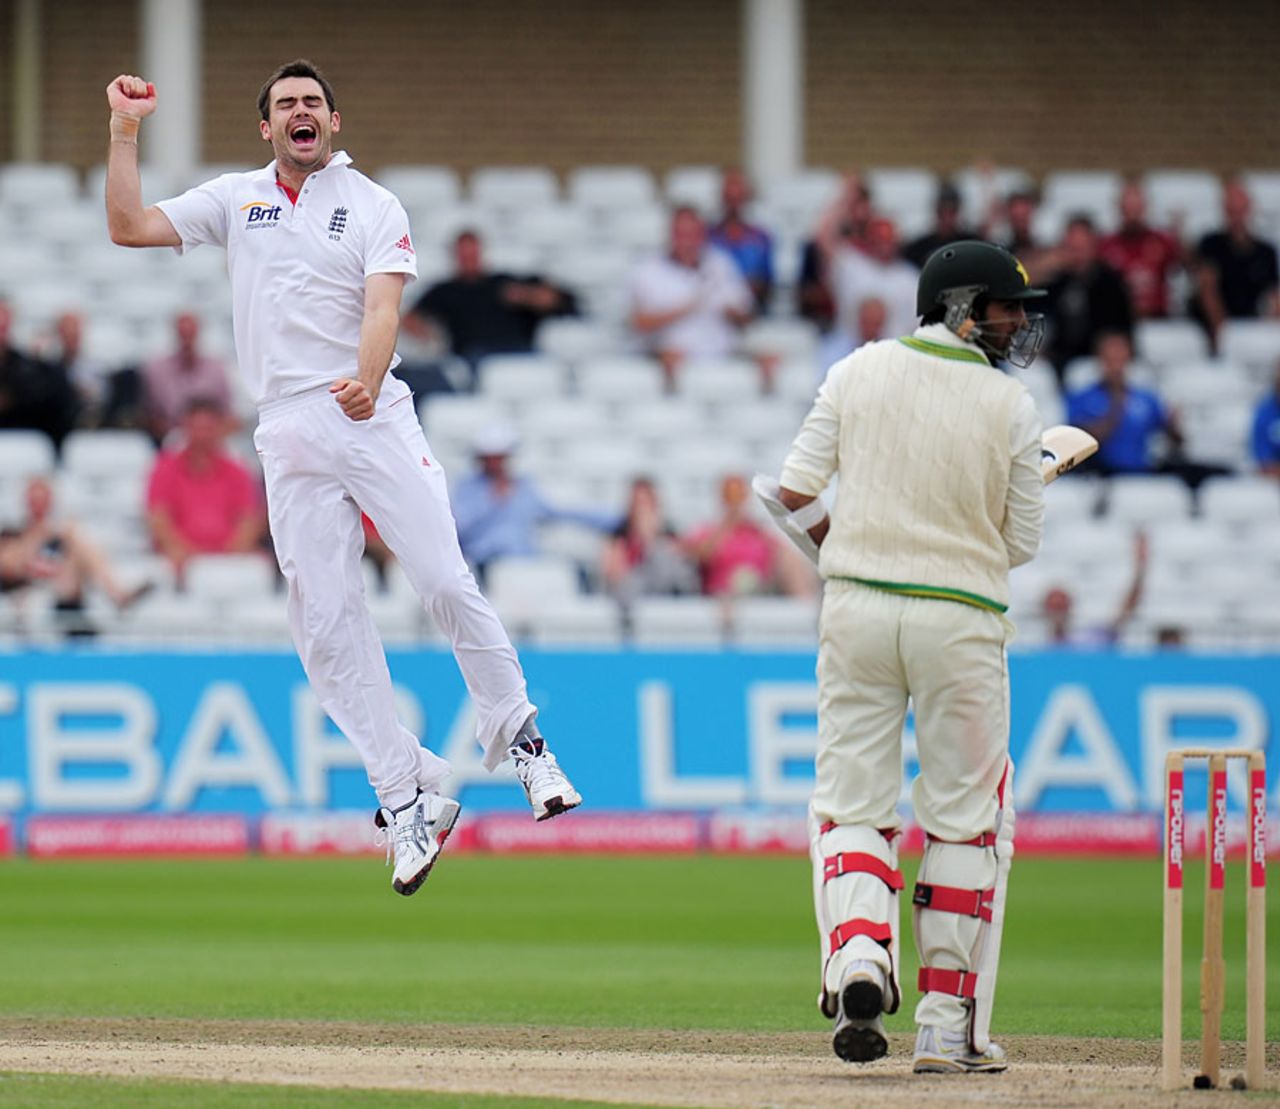 James Anderson sealed his second five-for in the Test and his first ever 10-wicket match haul when he dismissed Shoaib Malik, England v Pakistan, 1st Test, Trent Bridge, 1 August 2010